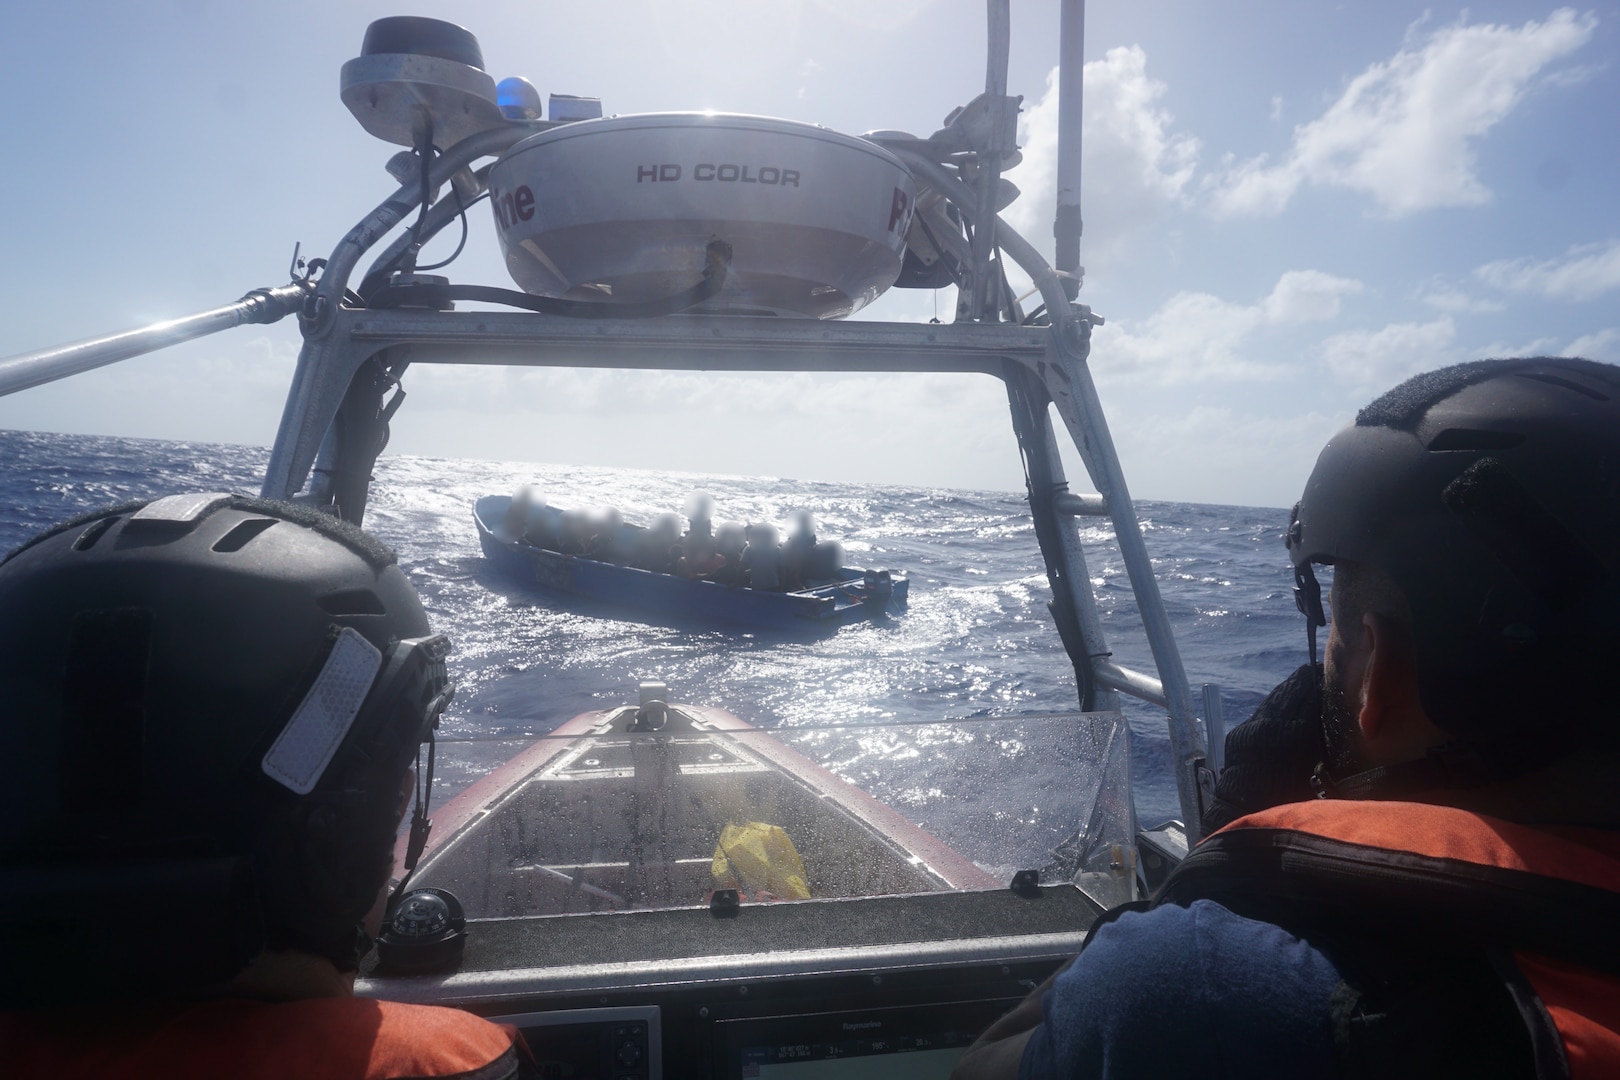 Coast Guard Cutter Joseph Napier’s Over the Horizon boat crew is on-scene with an unlawful irregular migration voyage vessel interdicted in Mona Passage waters west of Puerto Rico, Nov. 12, 2023.  Cutter Joseph Napier’s crew repatriated 34 migrants from this voyage to Punta Cana, Dominican Republic Nov. 13, 2023. (U.S. Coast Guard photo)